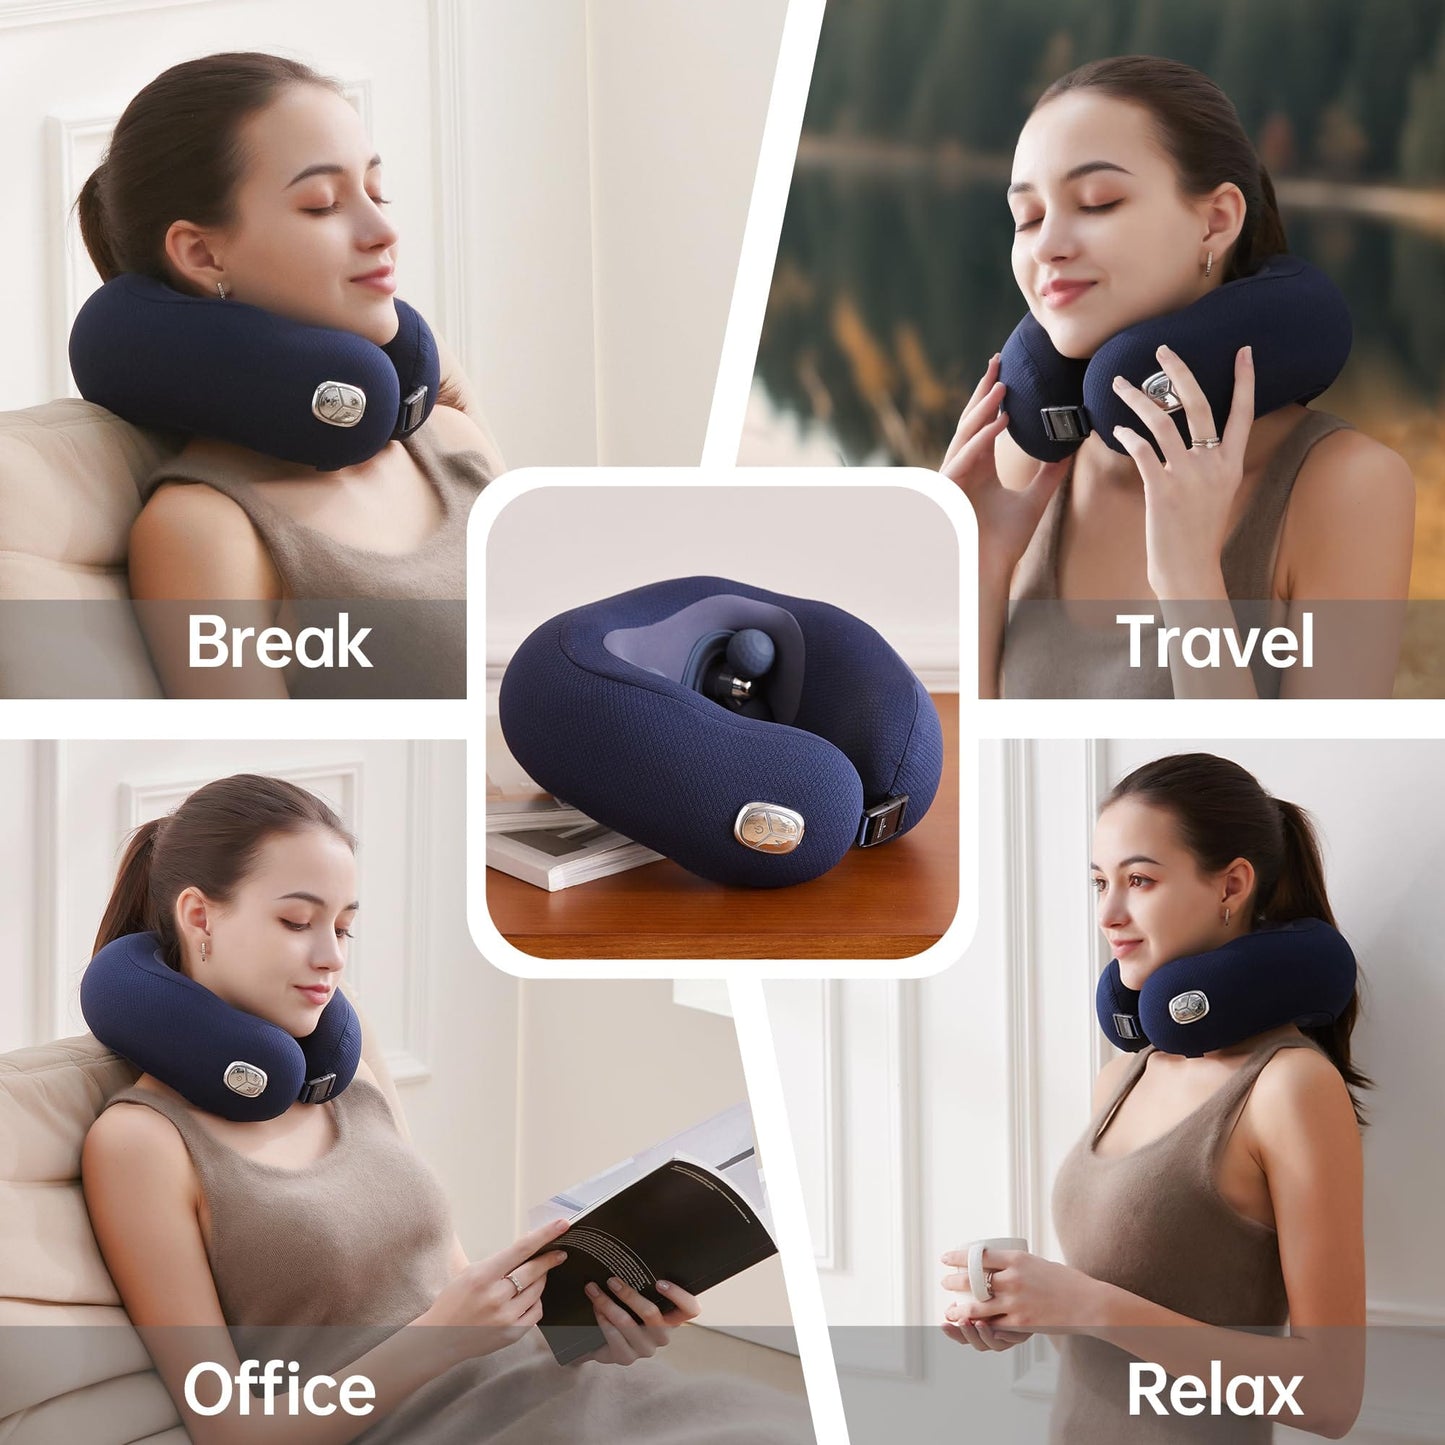 Real Relax MASSAGERS Real Relax® 2024 Travel Neck Pillow with Massage, Travel Electric Neck Massager with Heating for Neck Pain Relief, Neck Support Pillow for Airplane, Car, Office, Gift